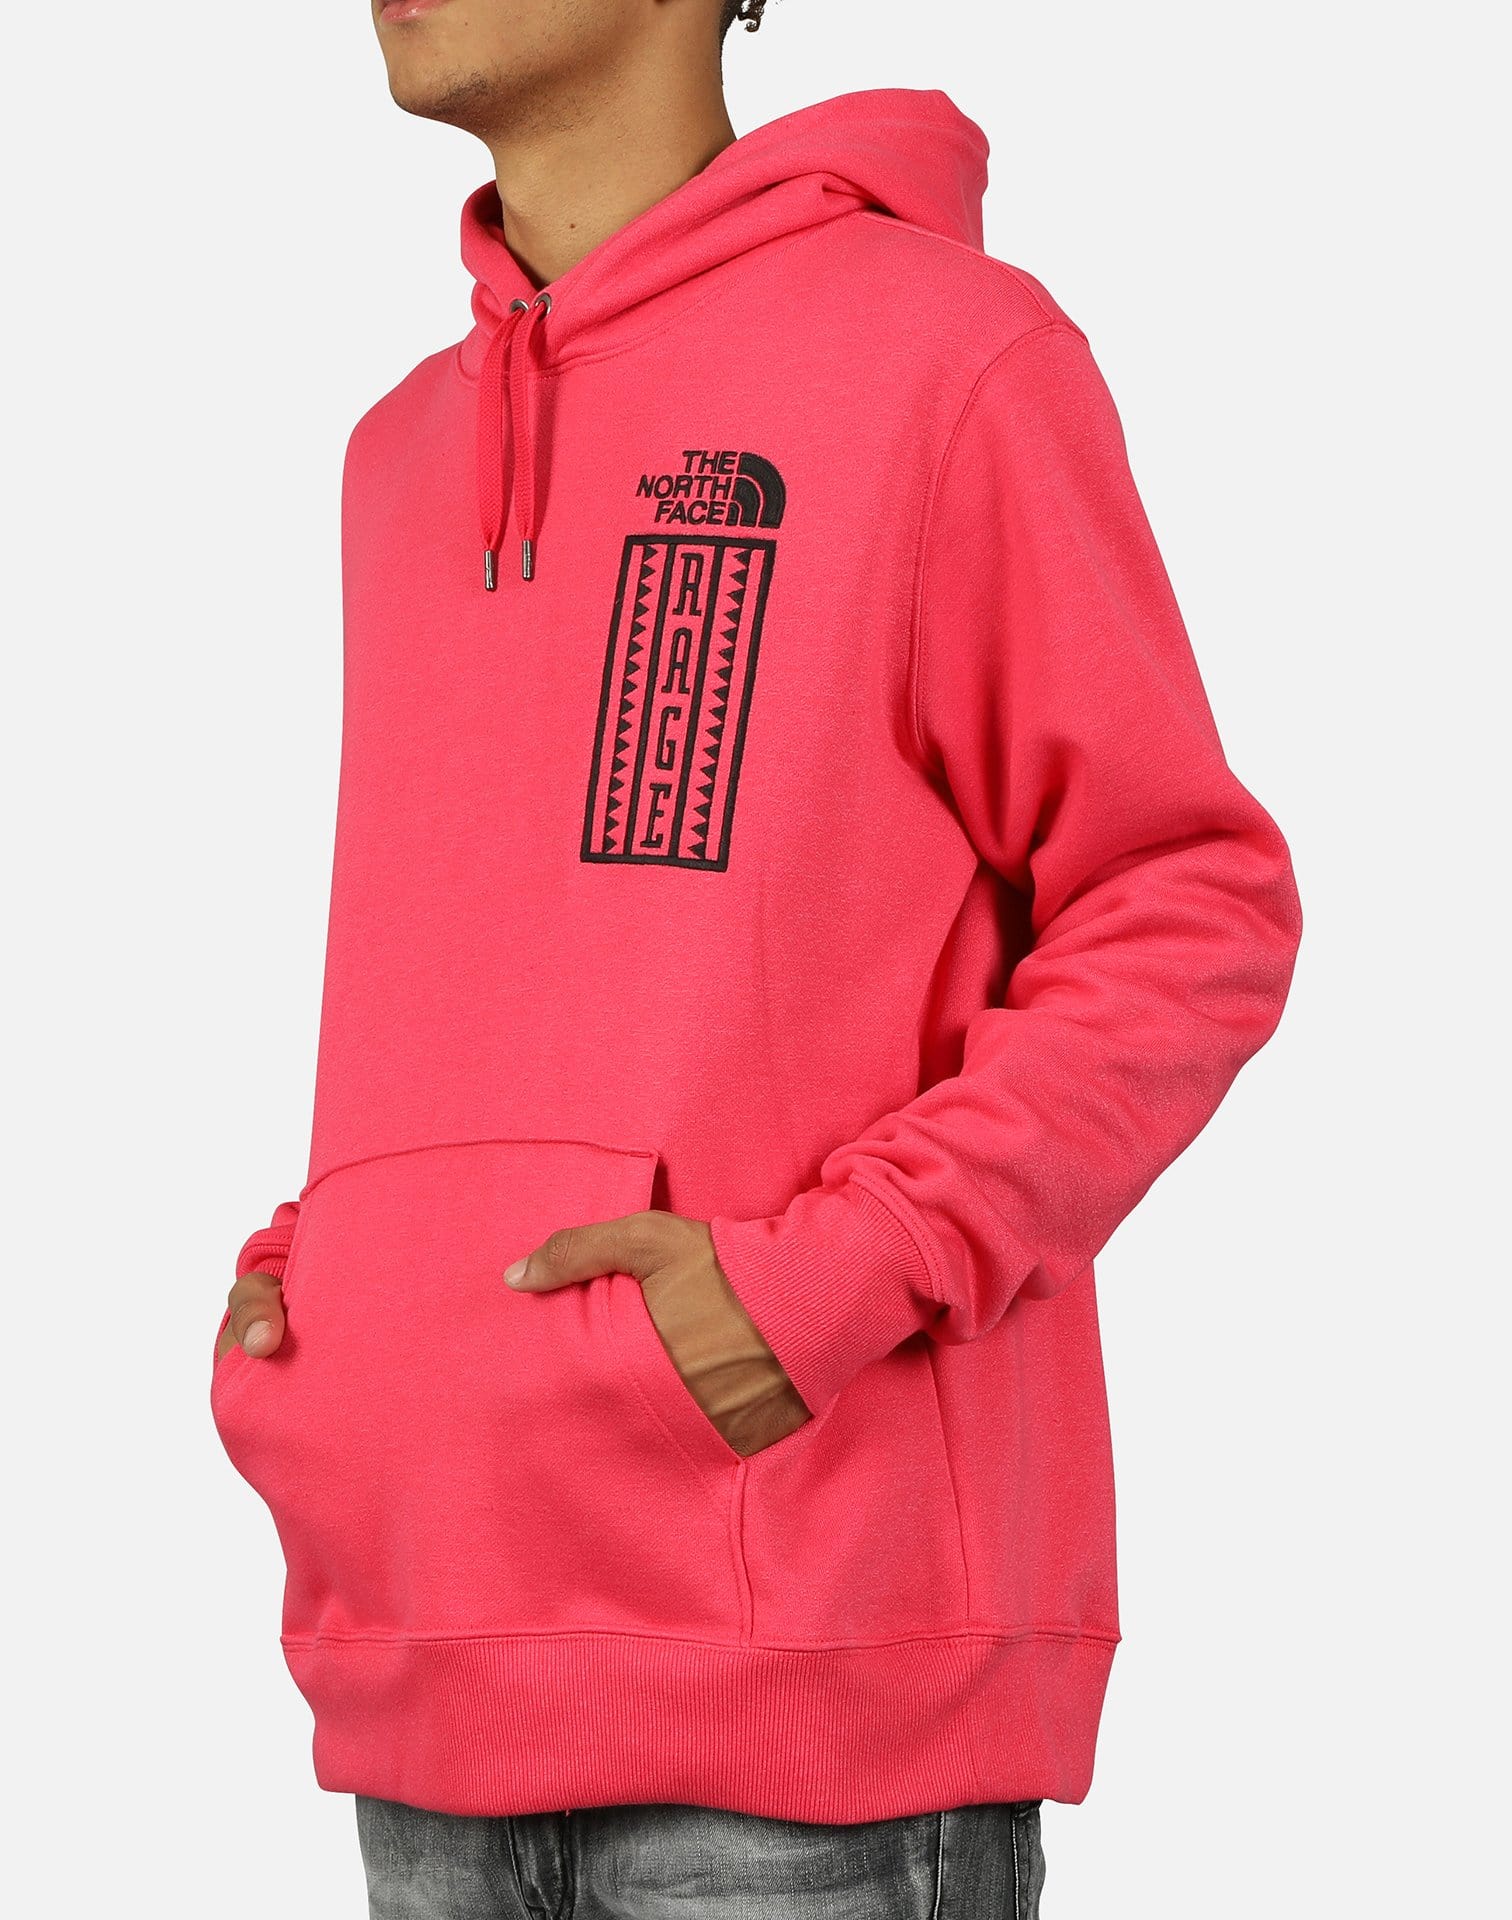 the north face 92 rage hoodie